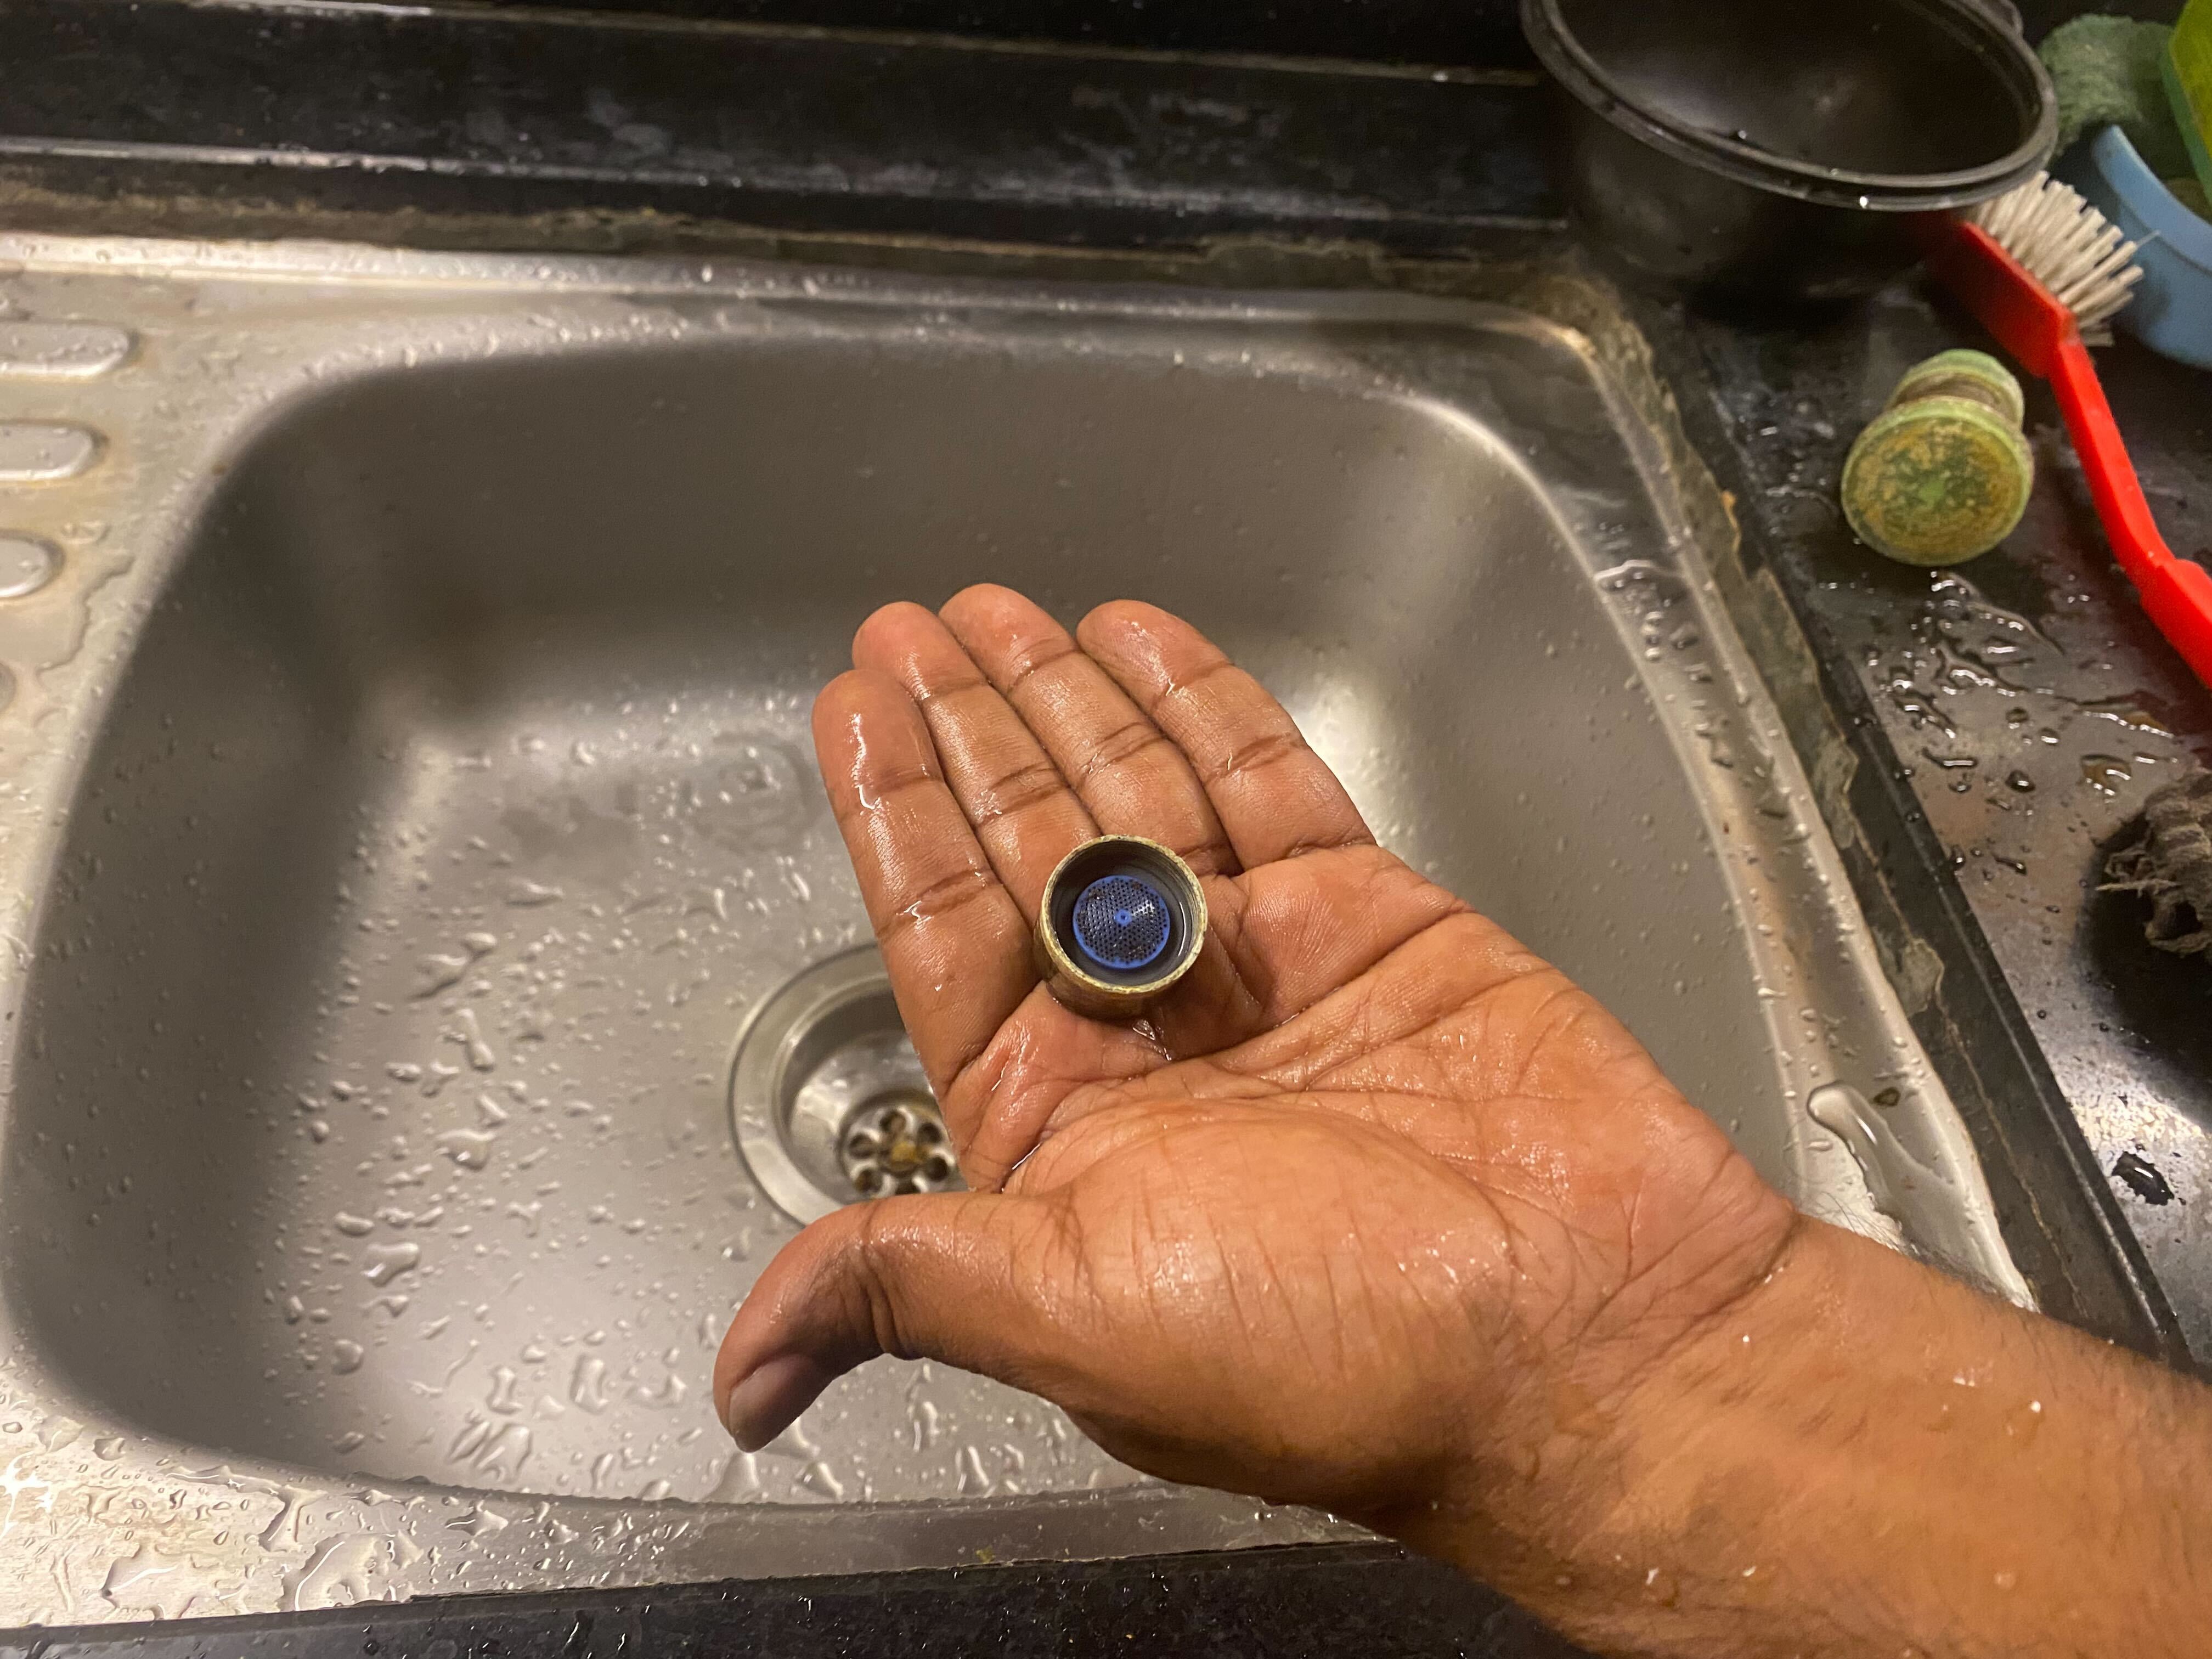 A resident shows a device for reducing the flow of water from a tap. Such devices have been installed in many apartments to regulate water supply amid the shortage